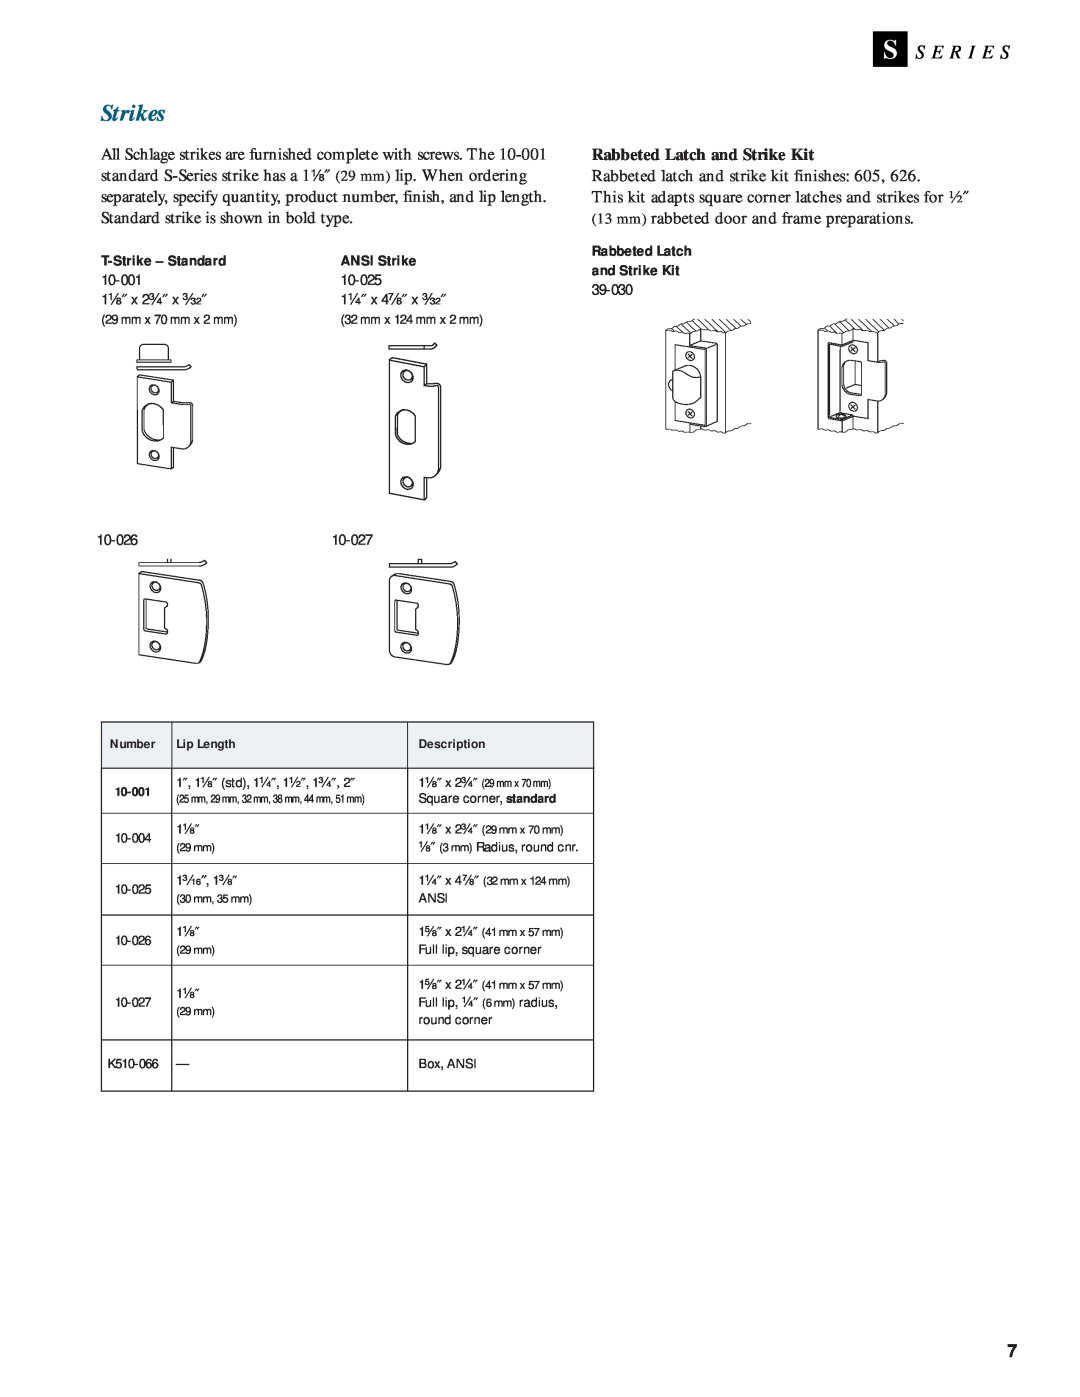 Schlage Door Locks manual Strikes, S S E R I E S, Rabbeted Latch and Strike Kit 